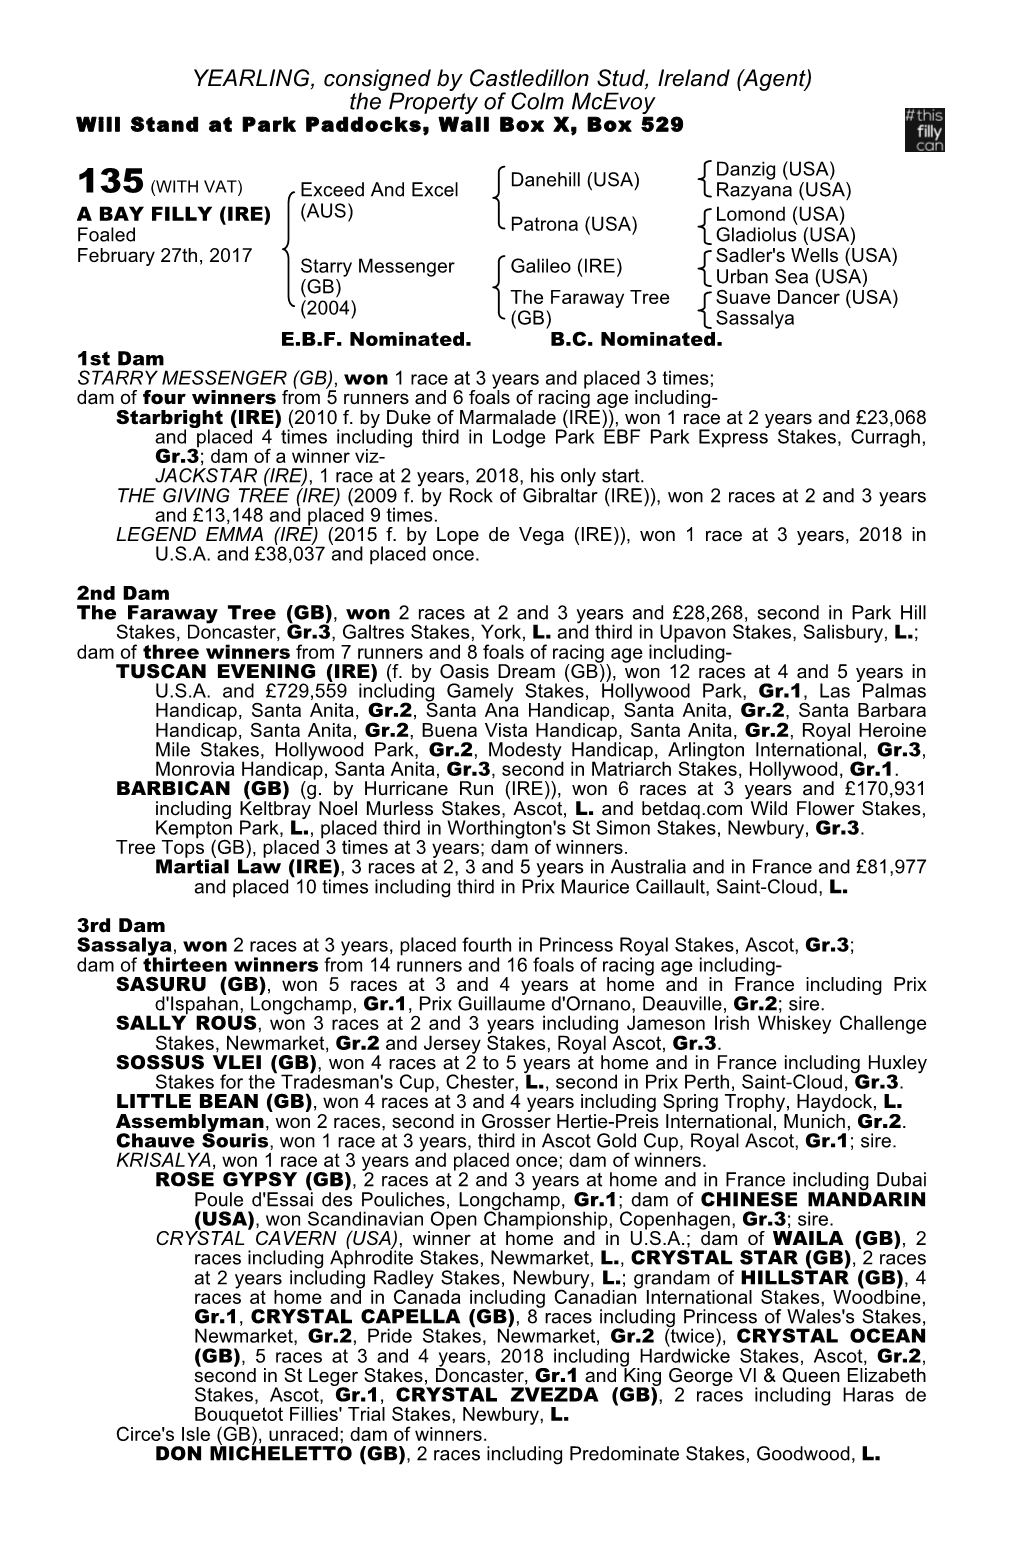 YEARLING, Consigned by Castledillon Stud, Ireland (Agent) the Property of Colm Mcevoy Will Stand at Park Paddocks, Wall Box X, Box 529